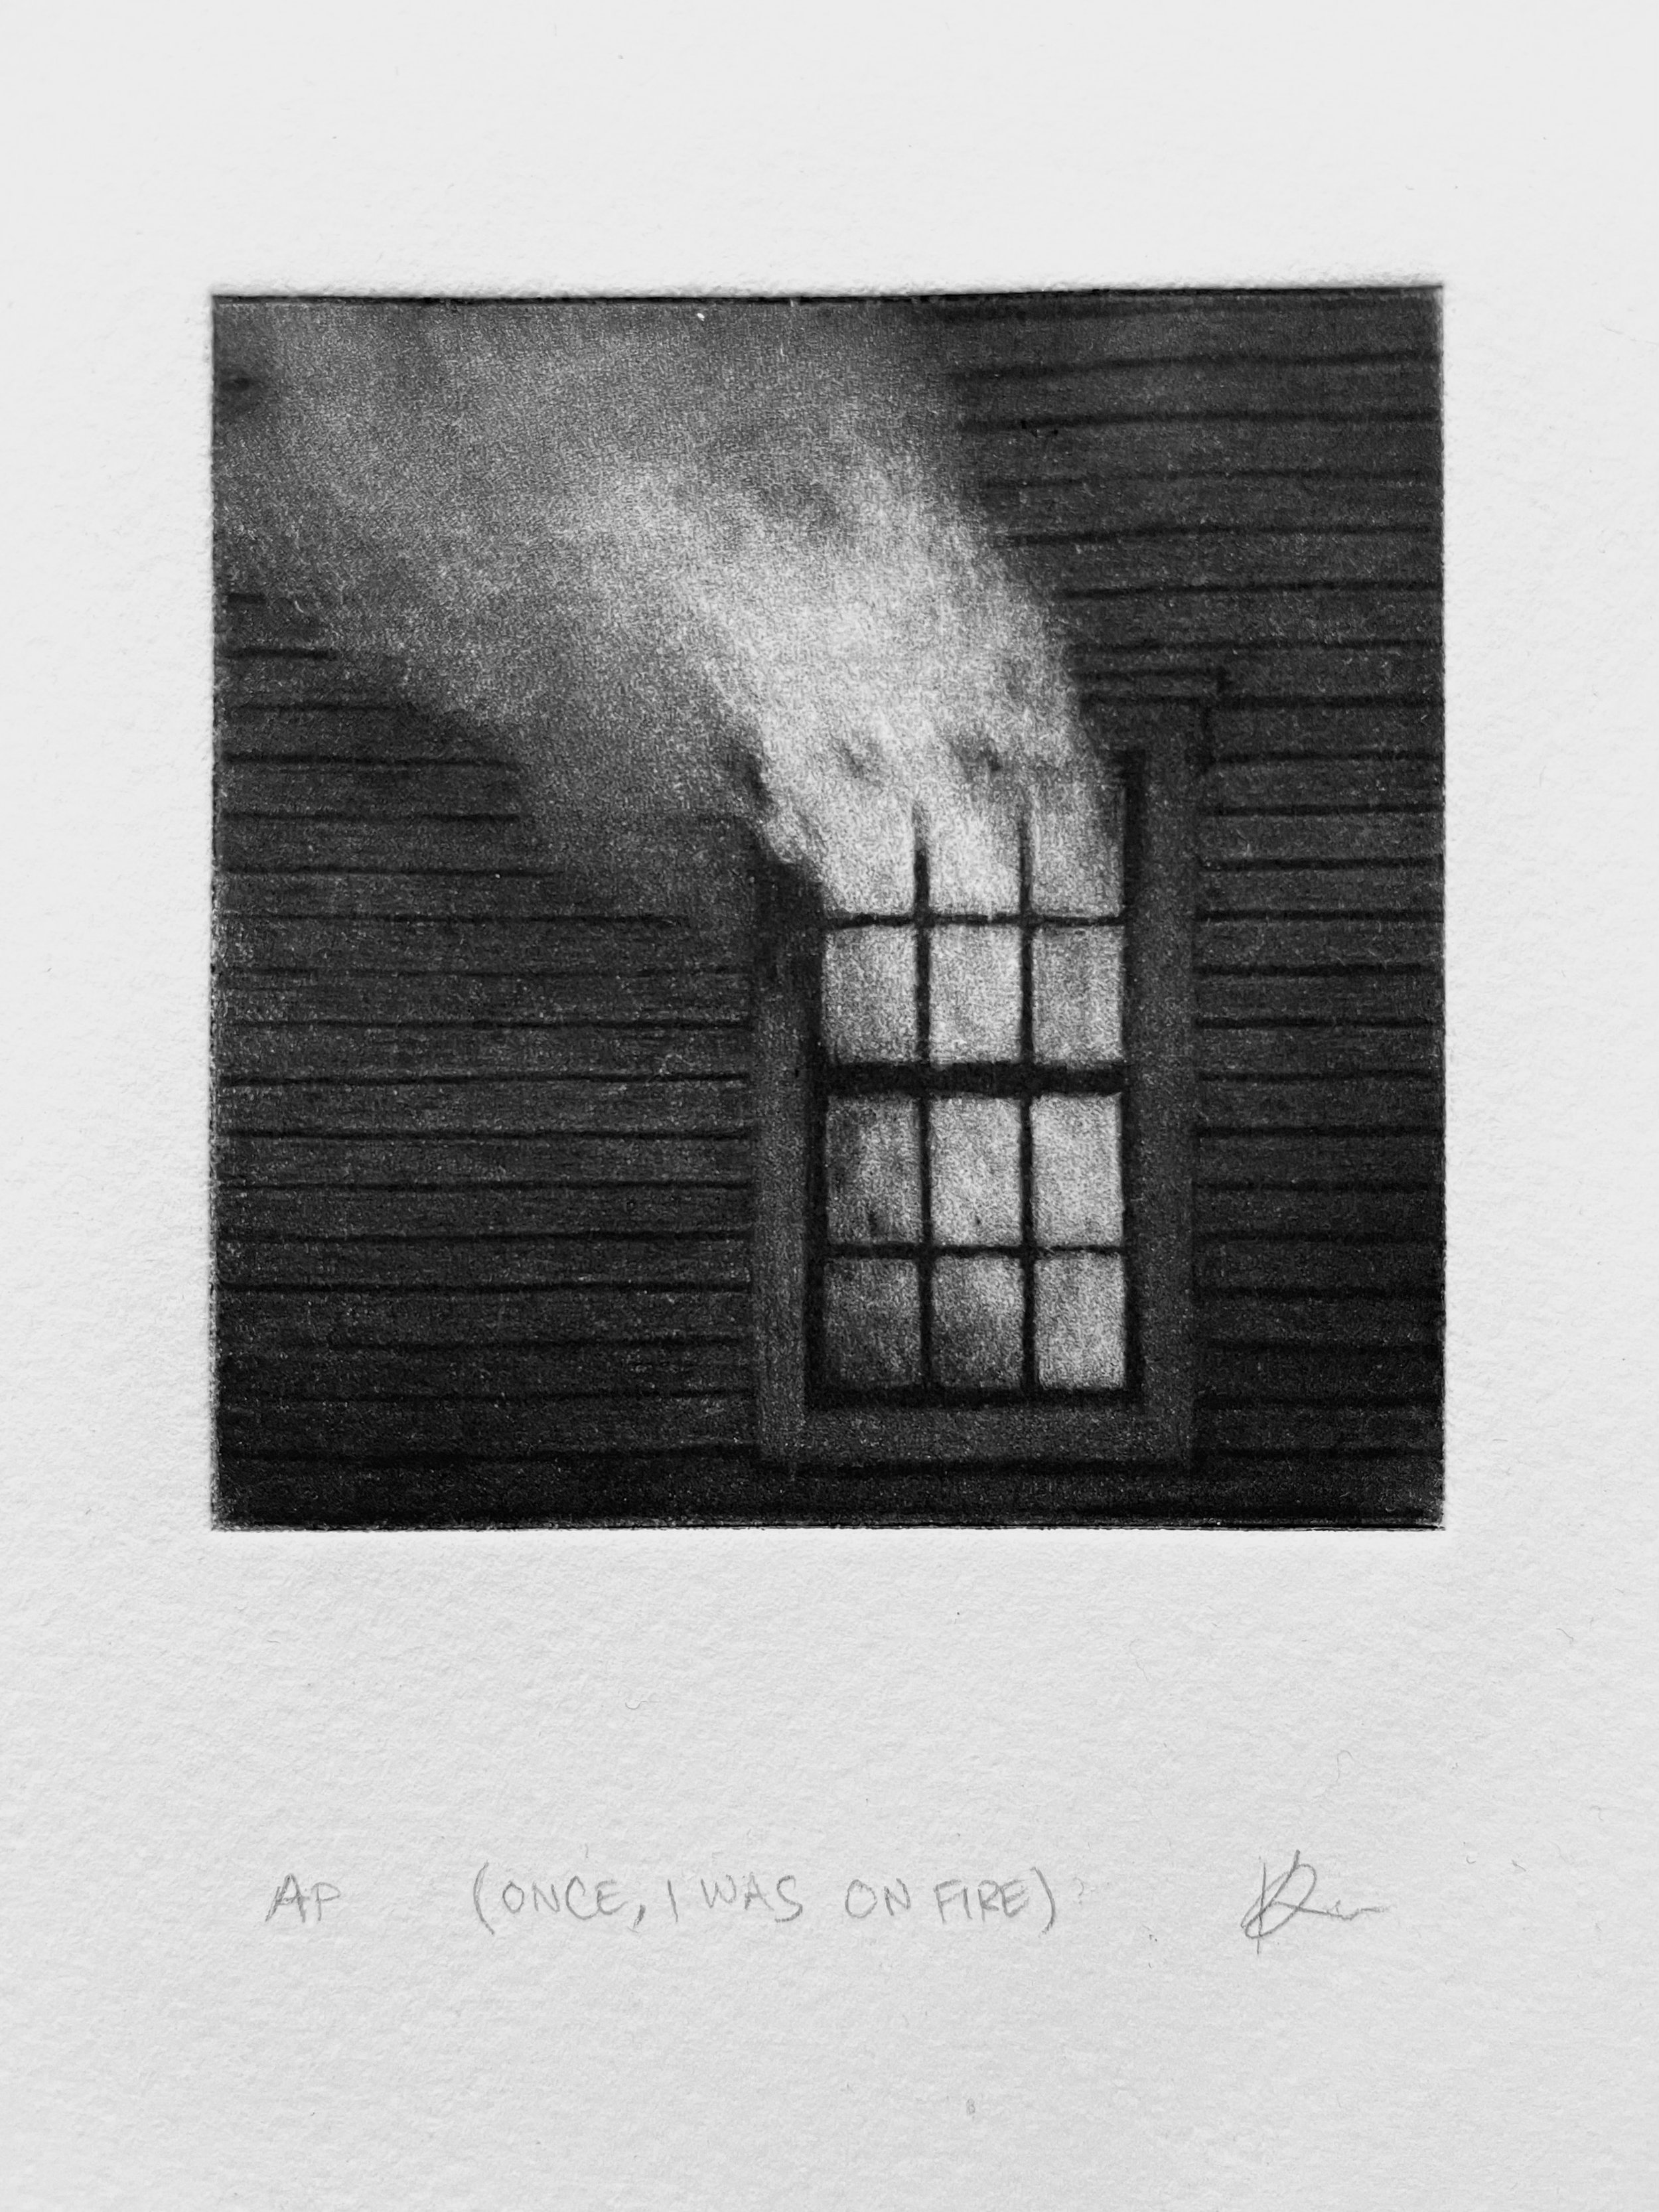   (once, i was on fire)   mezzotint. 3 x 3. 2022.  